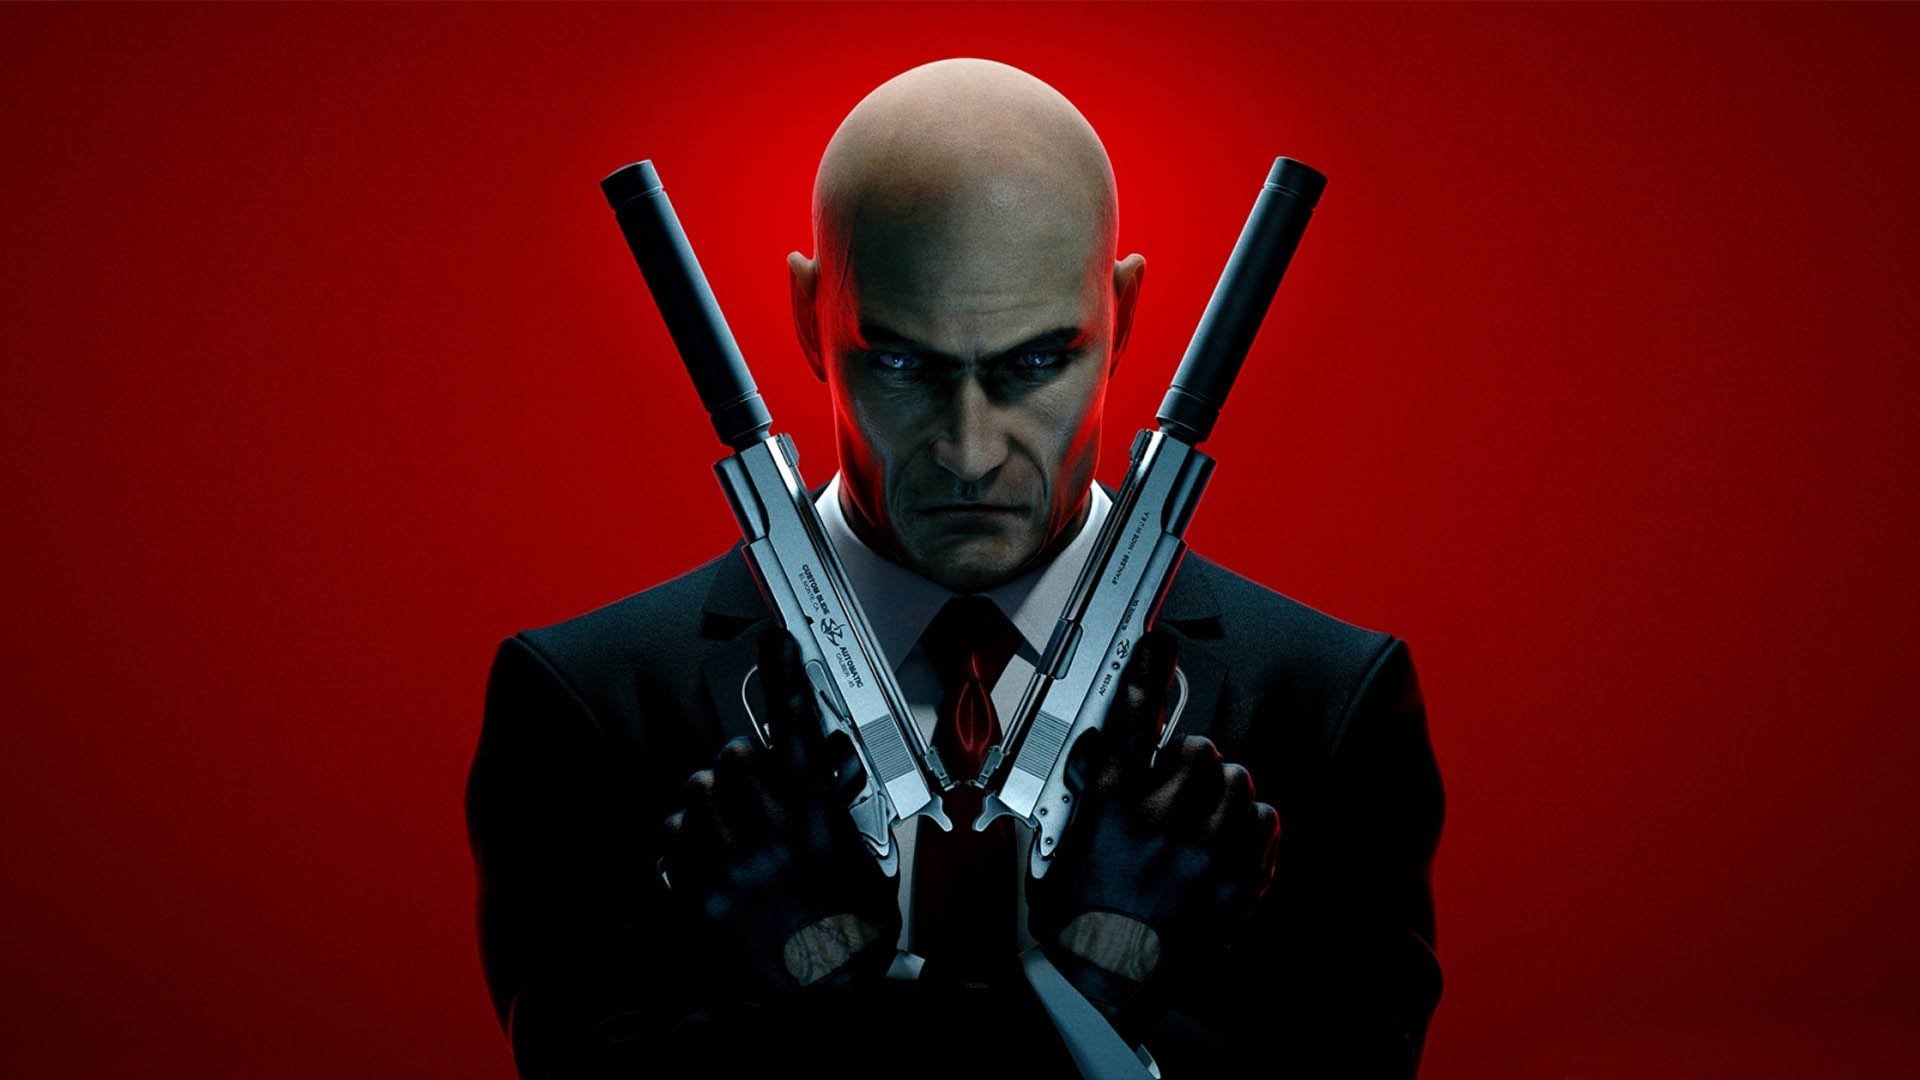 Hitman Releases On December 8th Evolving Storyline Concludes In